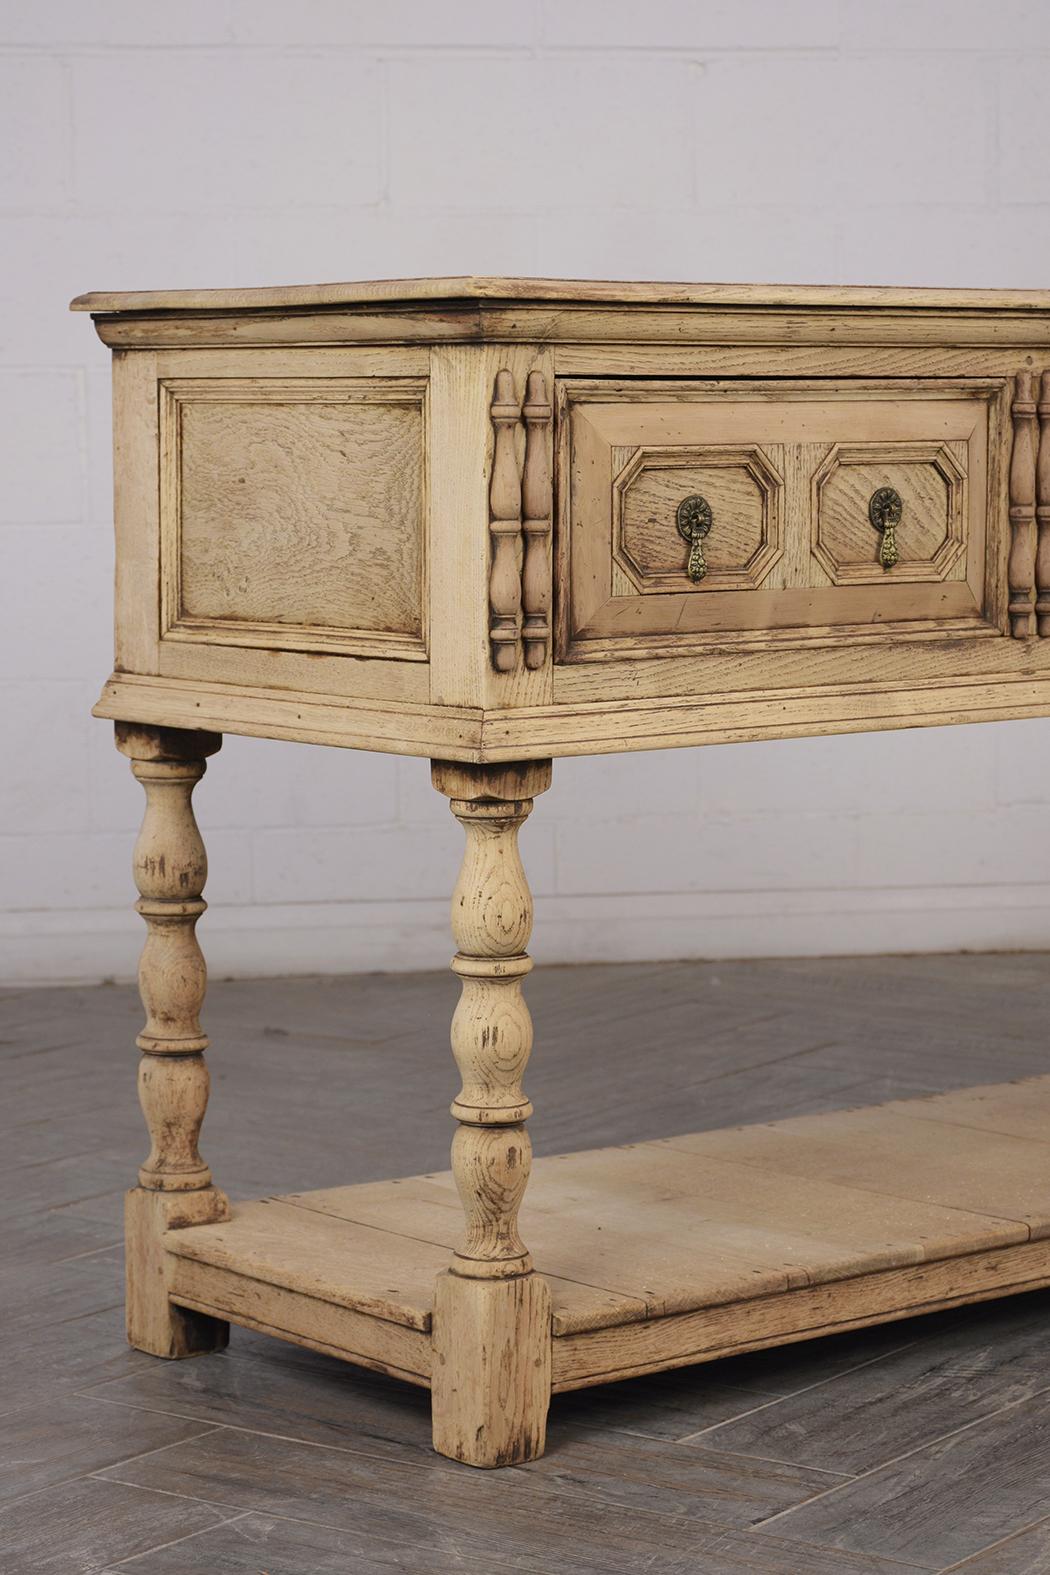 Woodwork Antique Spanish Style Server with a Bleach Finish 